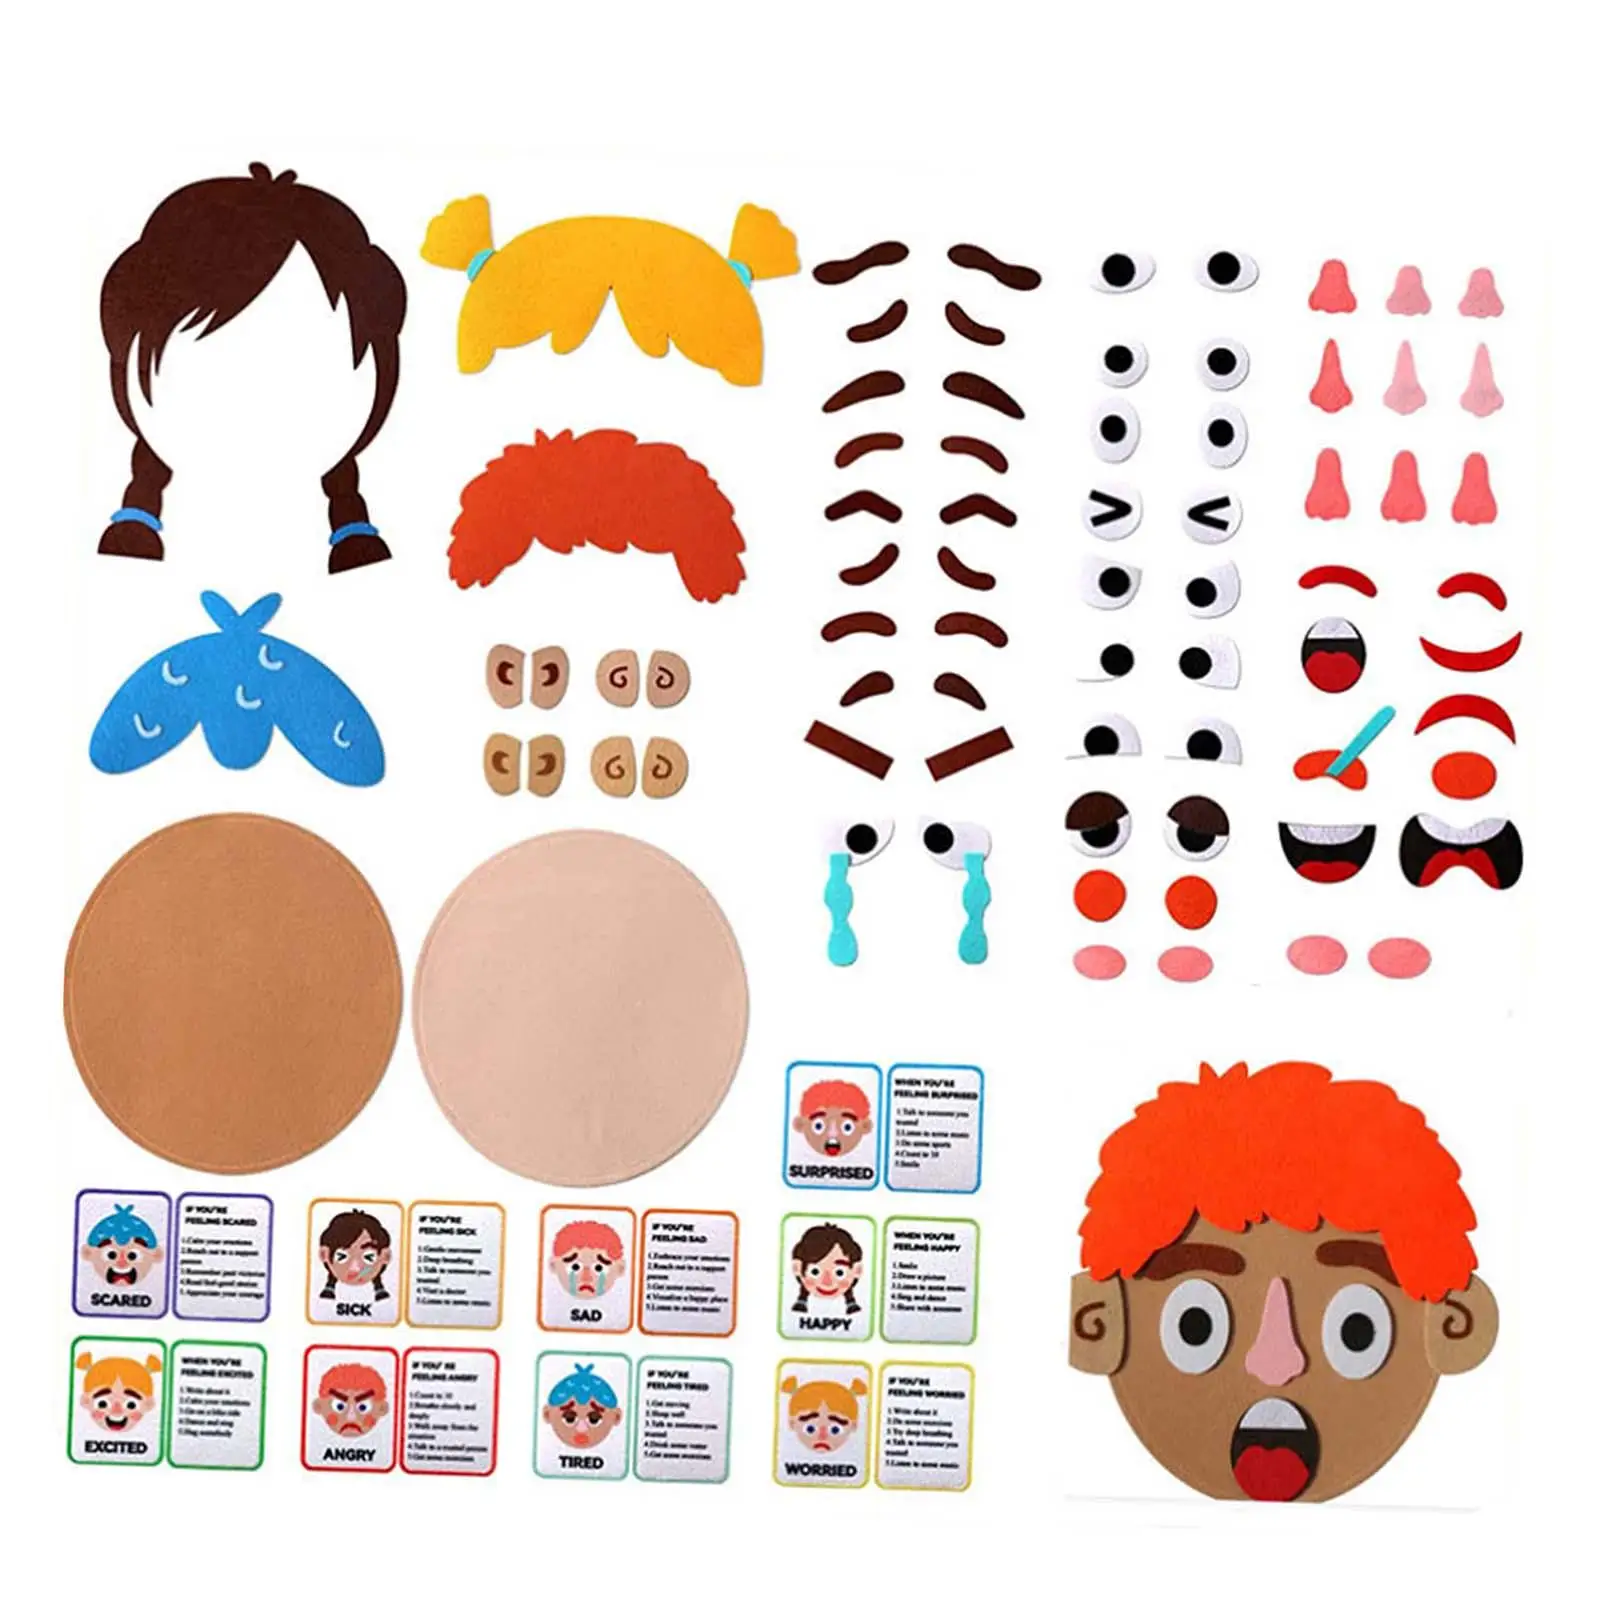 Social Emotional Learning Activities Express Emotions Faces Stickers Games Faces Games for Toddlers Children Boys Kids Ages 3+